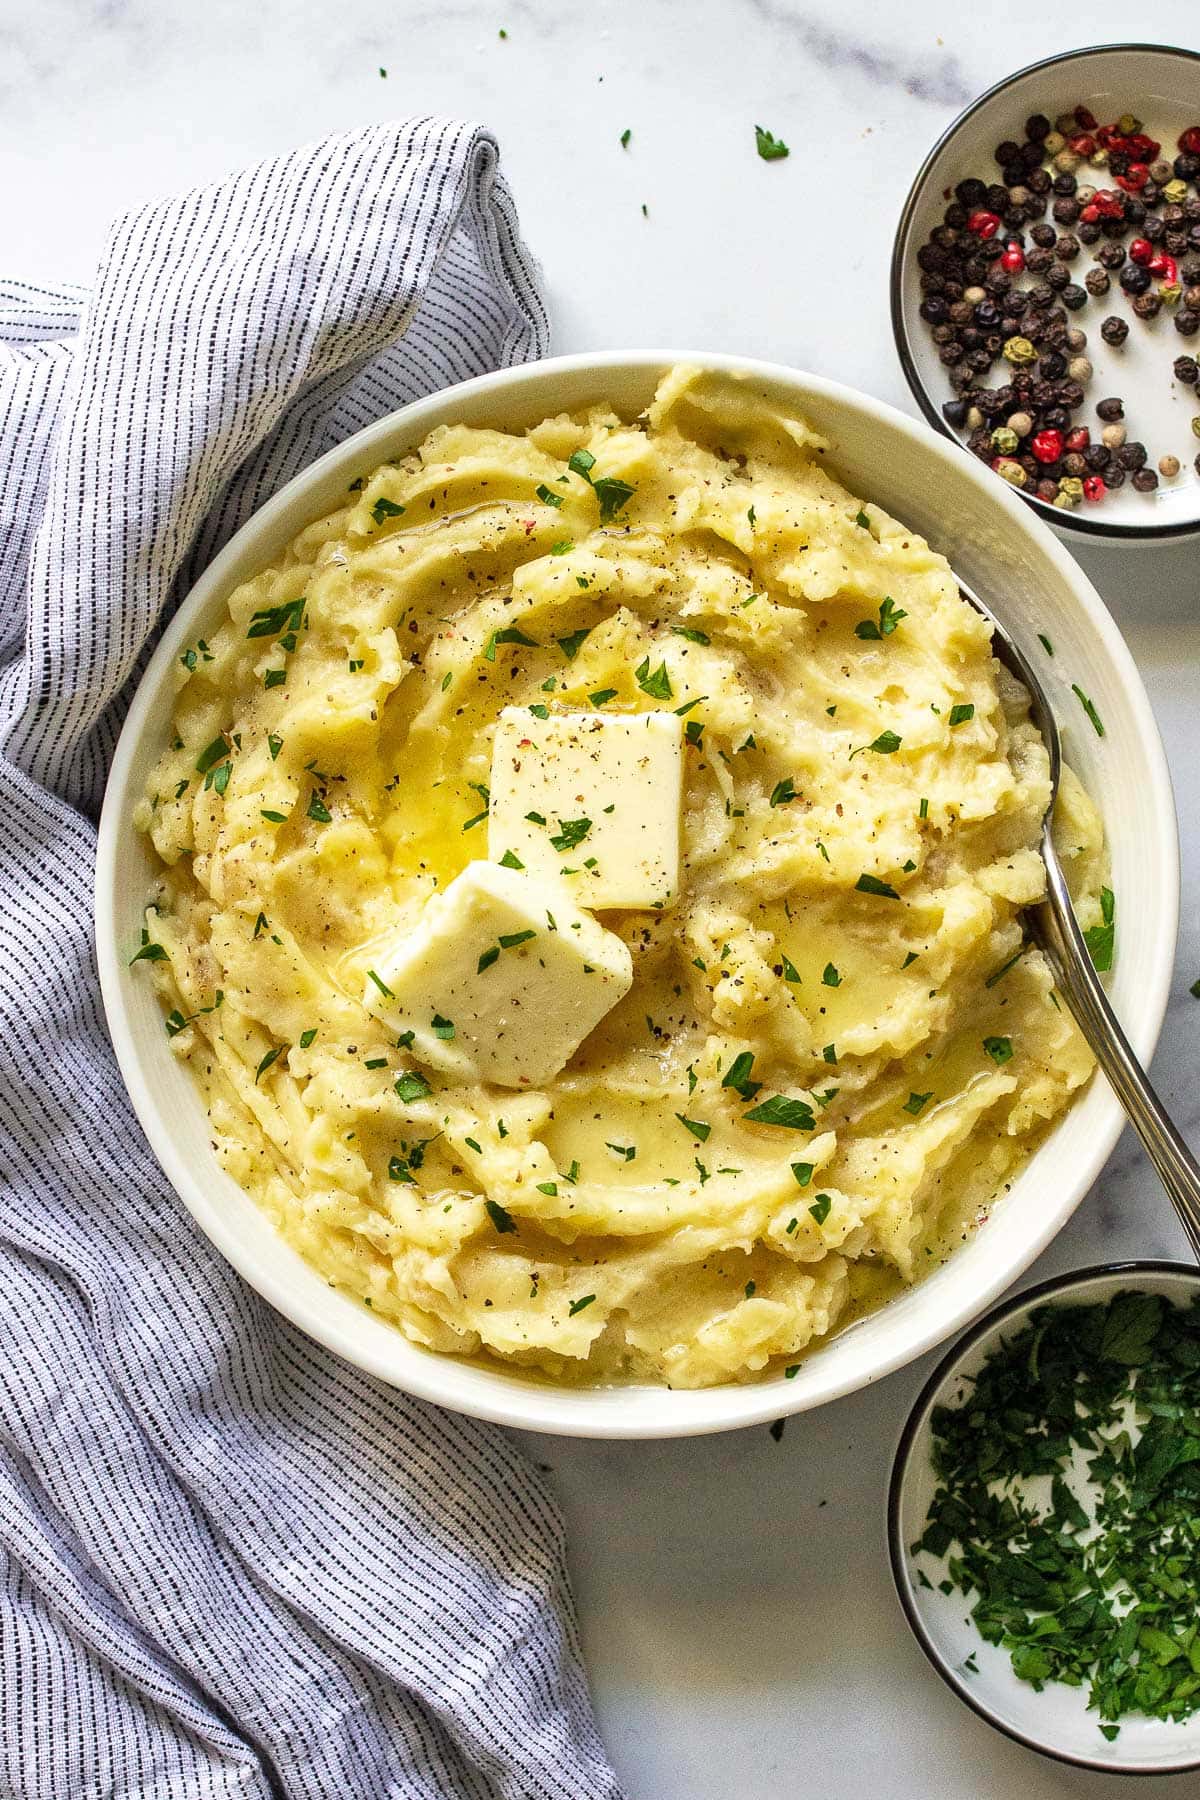 A white bowl of mashed potatoes with slabs of butter and fresh parsley on top.